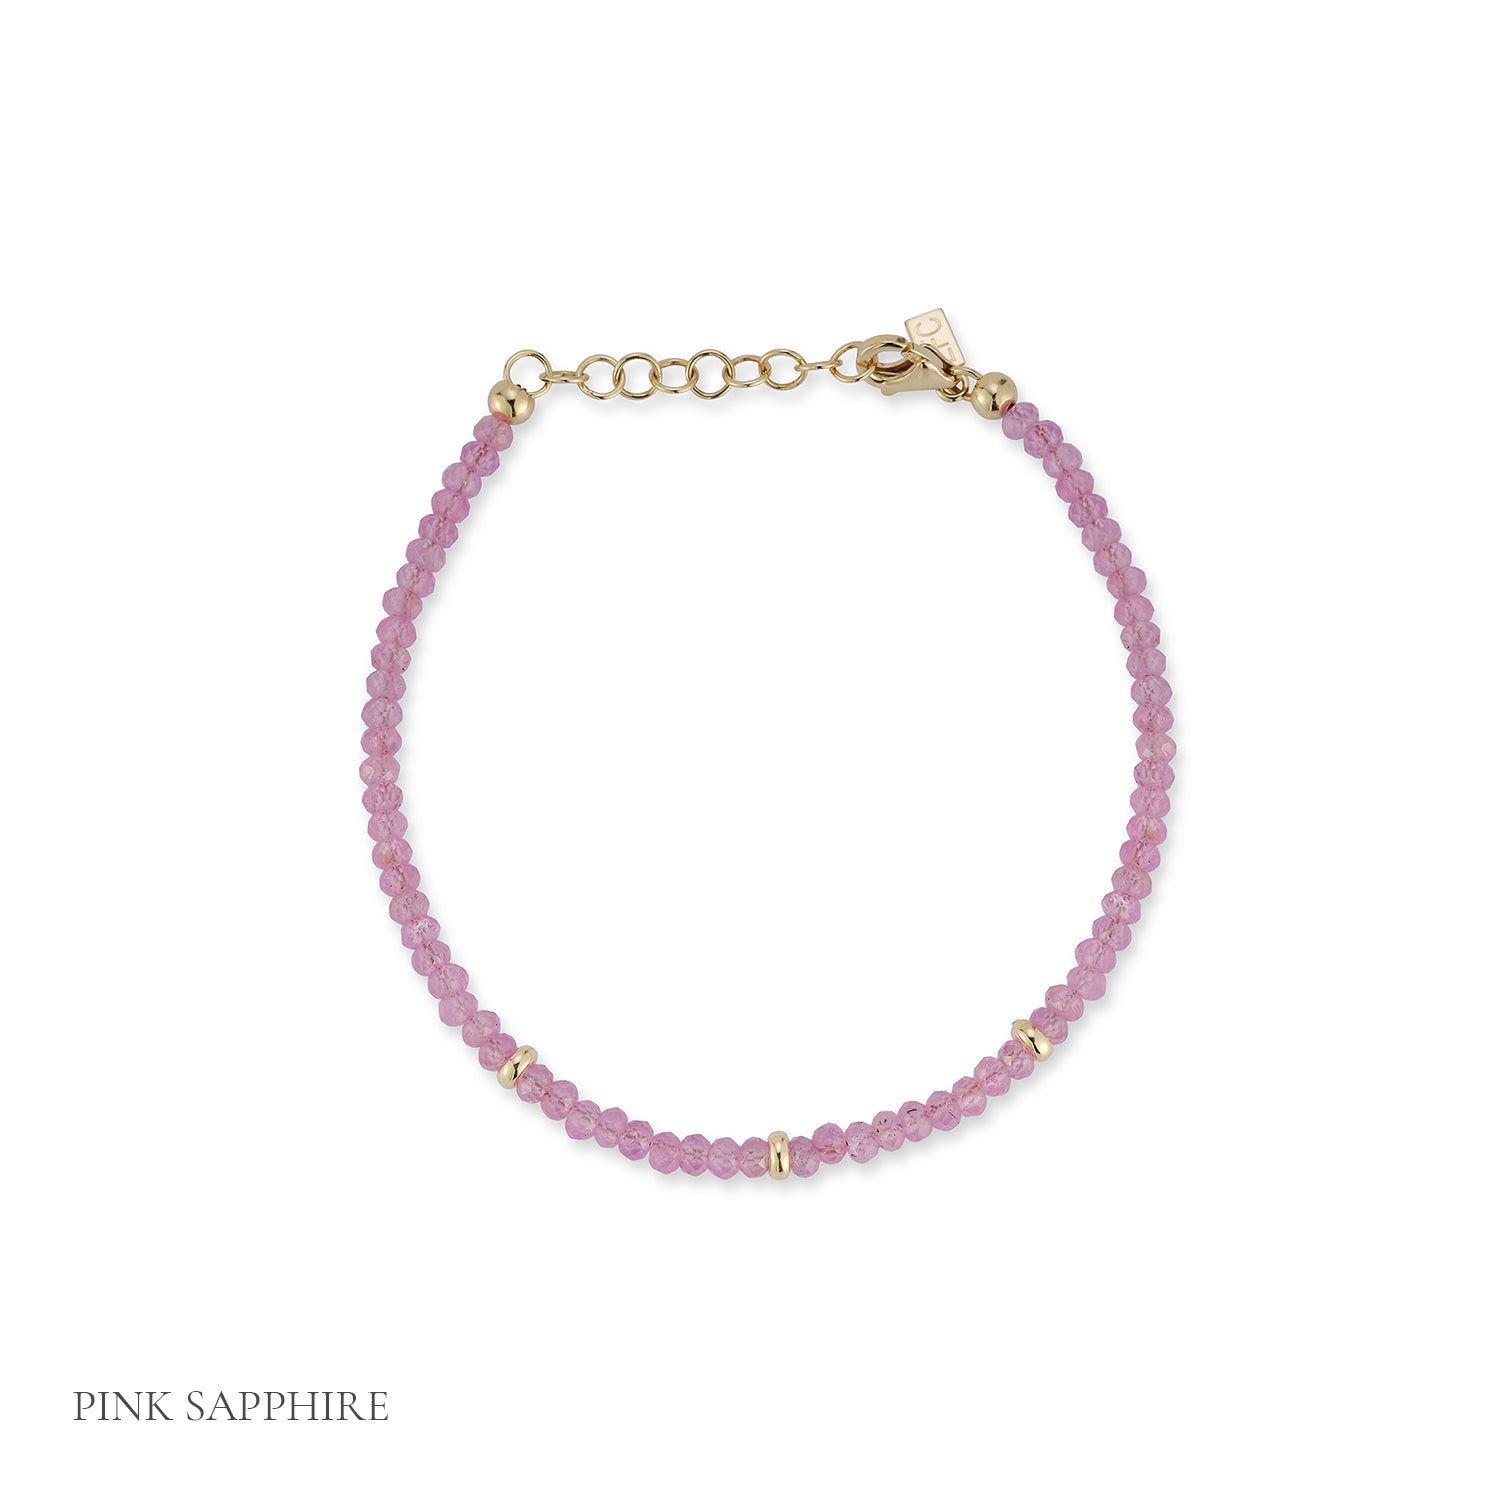 Birthstone Bead Bracelet in Pink Sapphire with 14k yellow gold chain - September Option